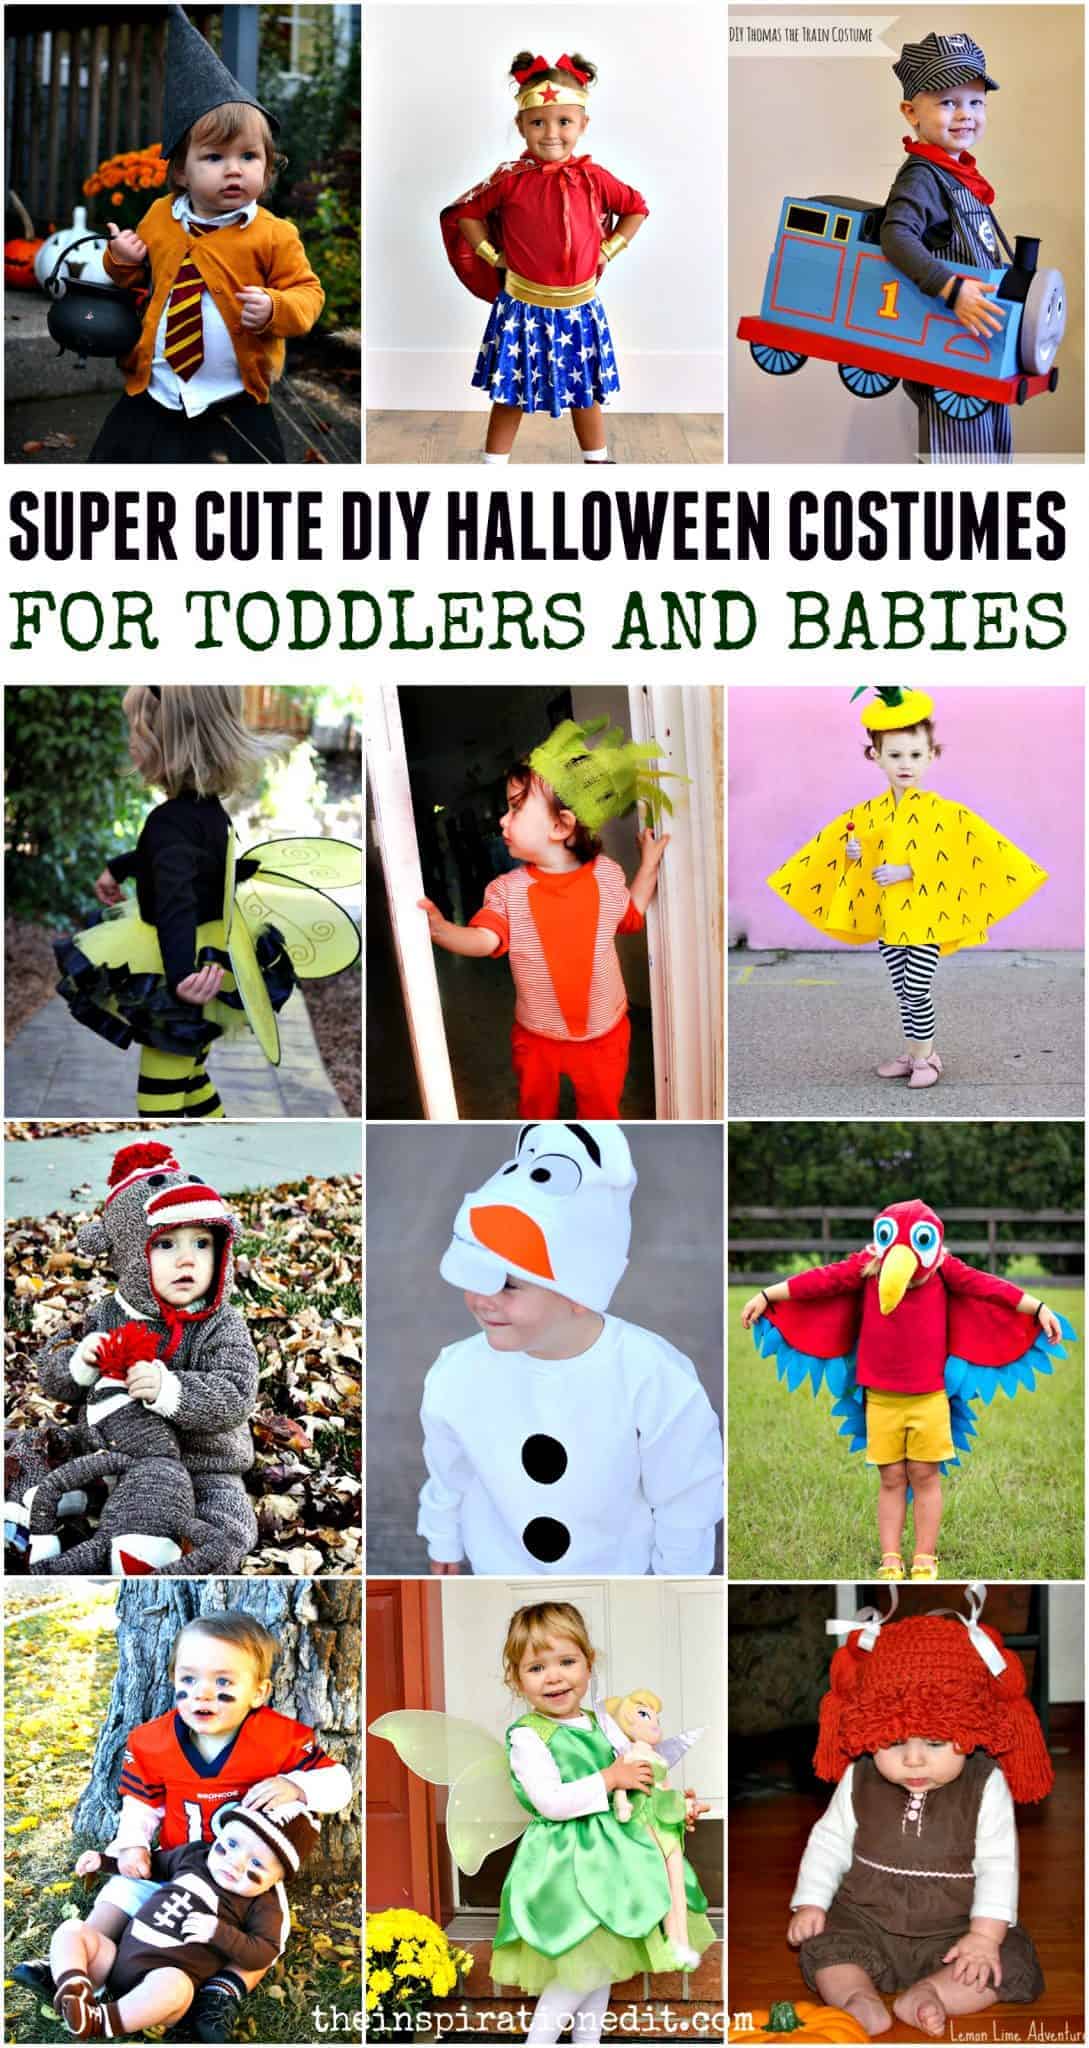 Halloween Costumes For Babies And Toddlers · The Inspiration Edit